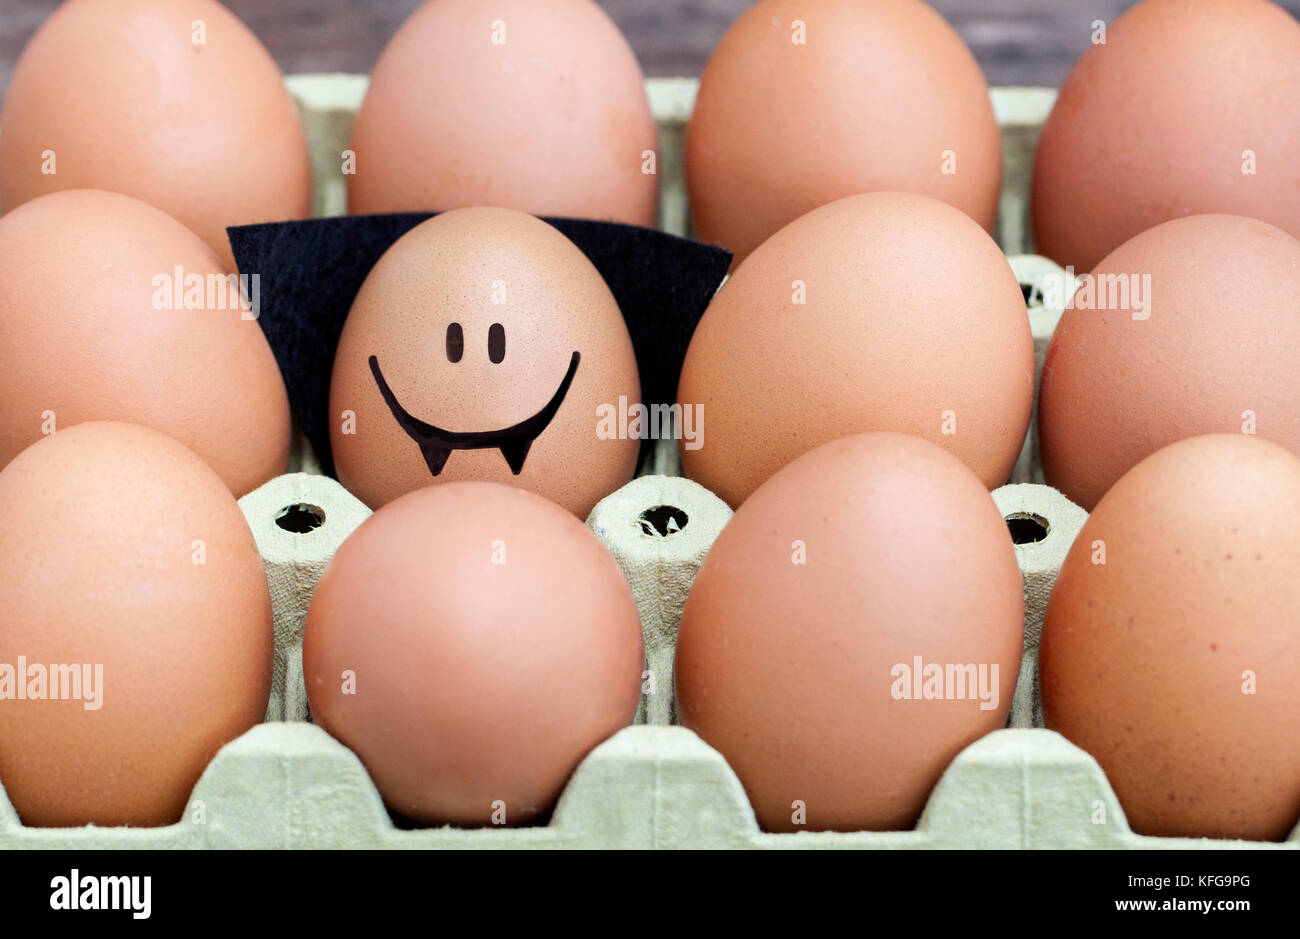 Smiling egg  dressed up as a vampire wearing souronded by blank brown eggs. Stock Photo